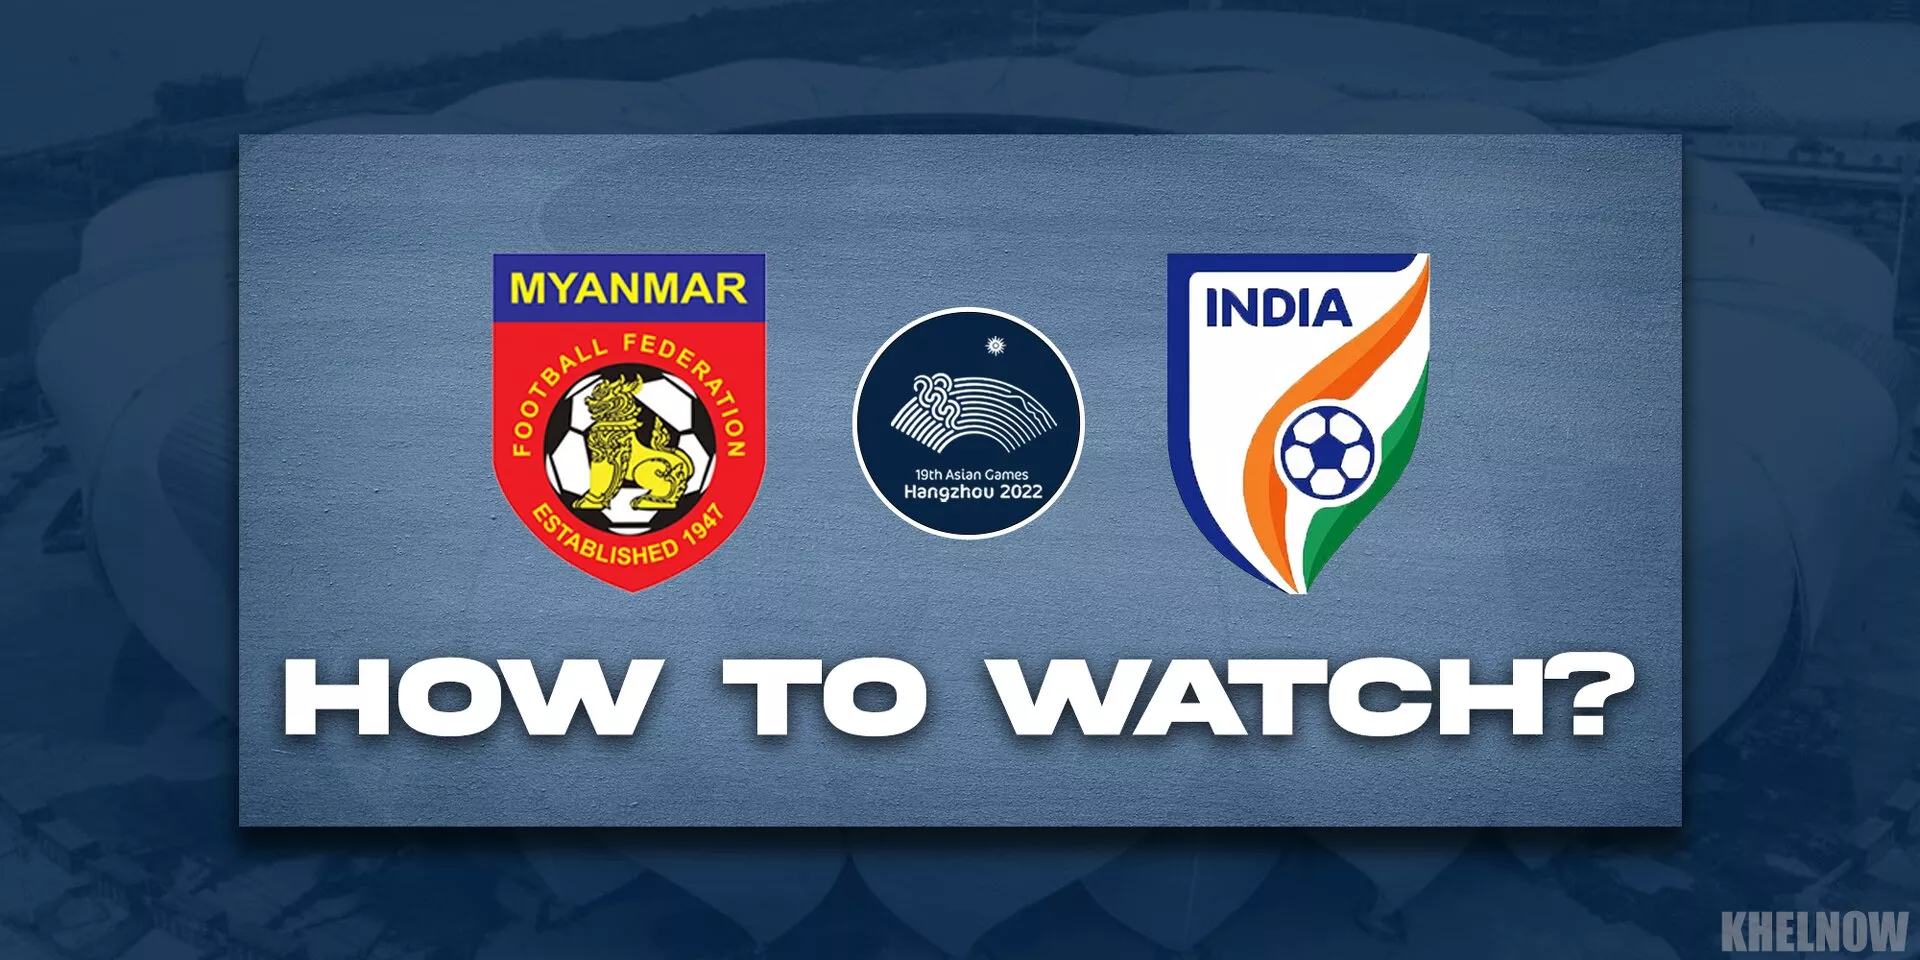 Asian Games Football: Where and how to watch Myanmar vs India game?